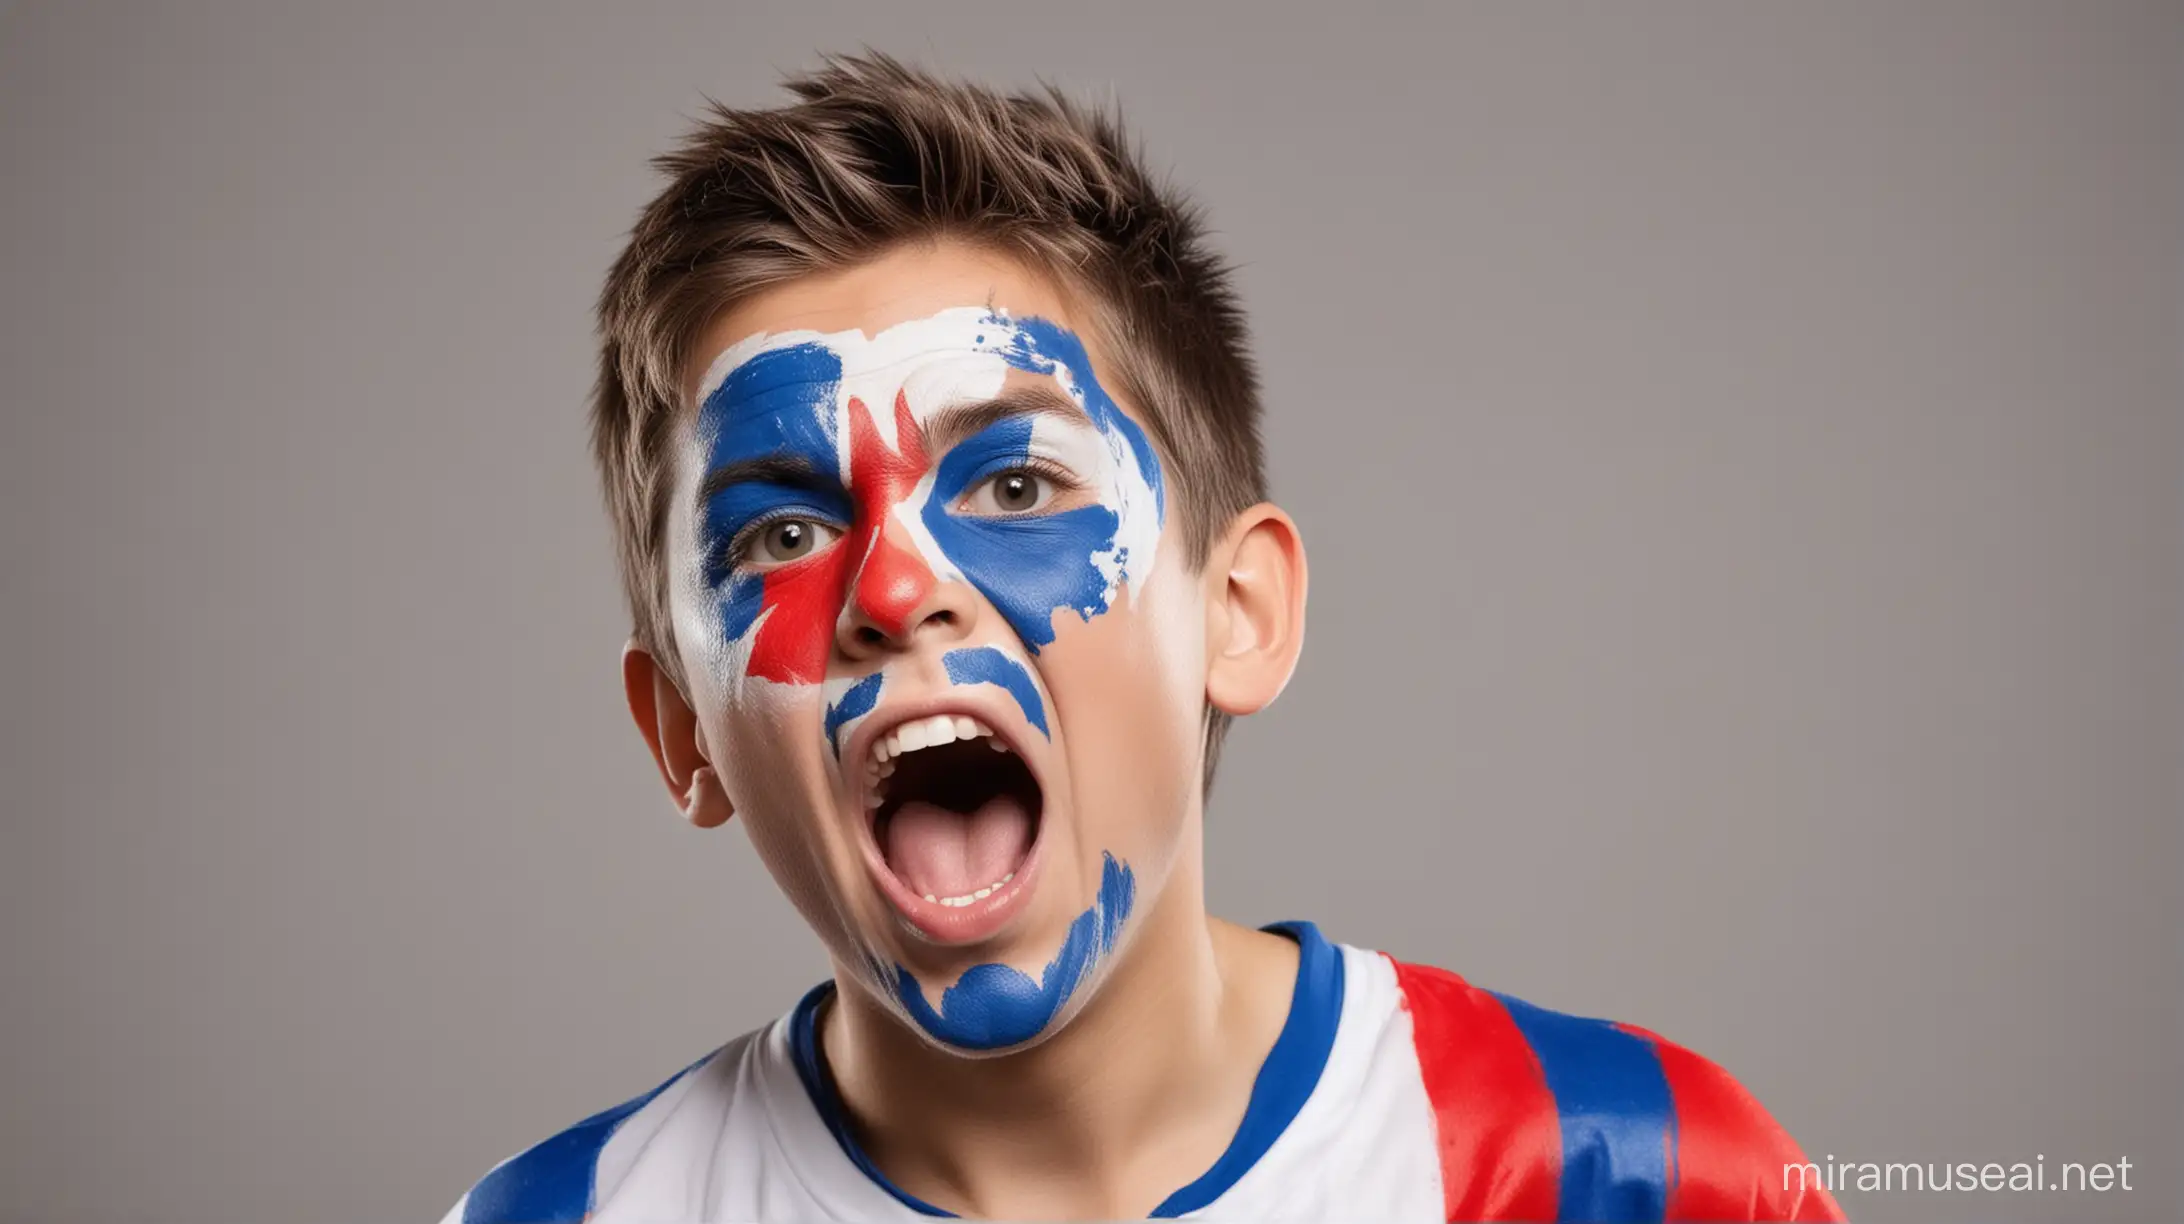 Enthusiastic Soccer Fan with Painted Face Cheering Alone